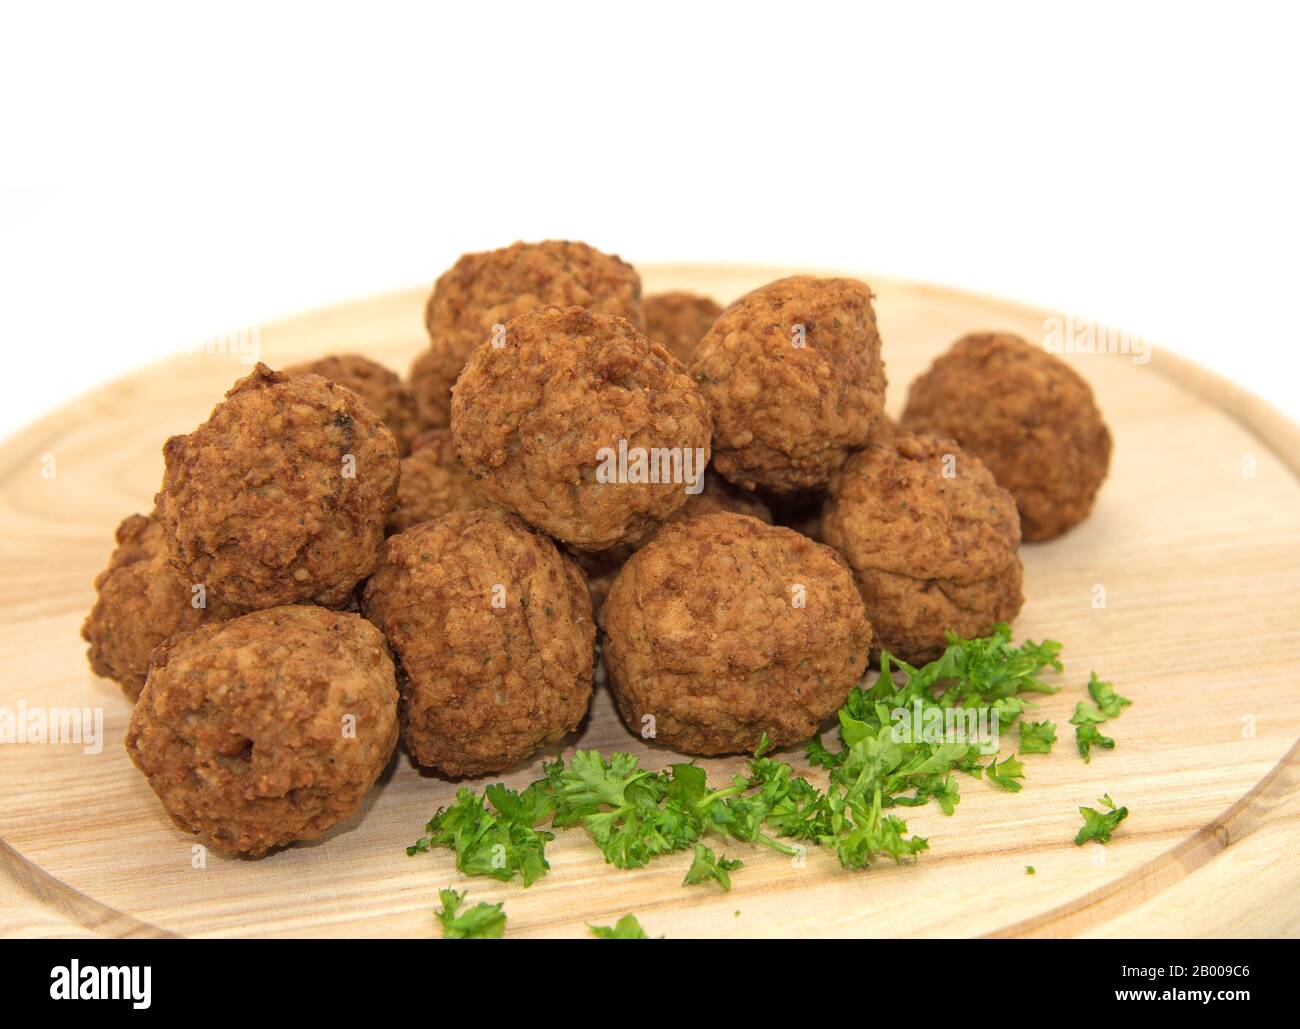 Fried meatballs on a wooden plate Stock Photo